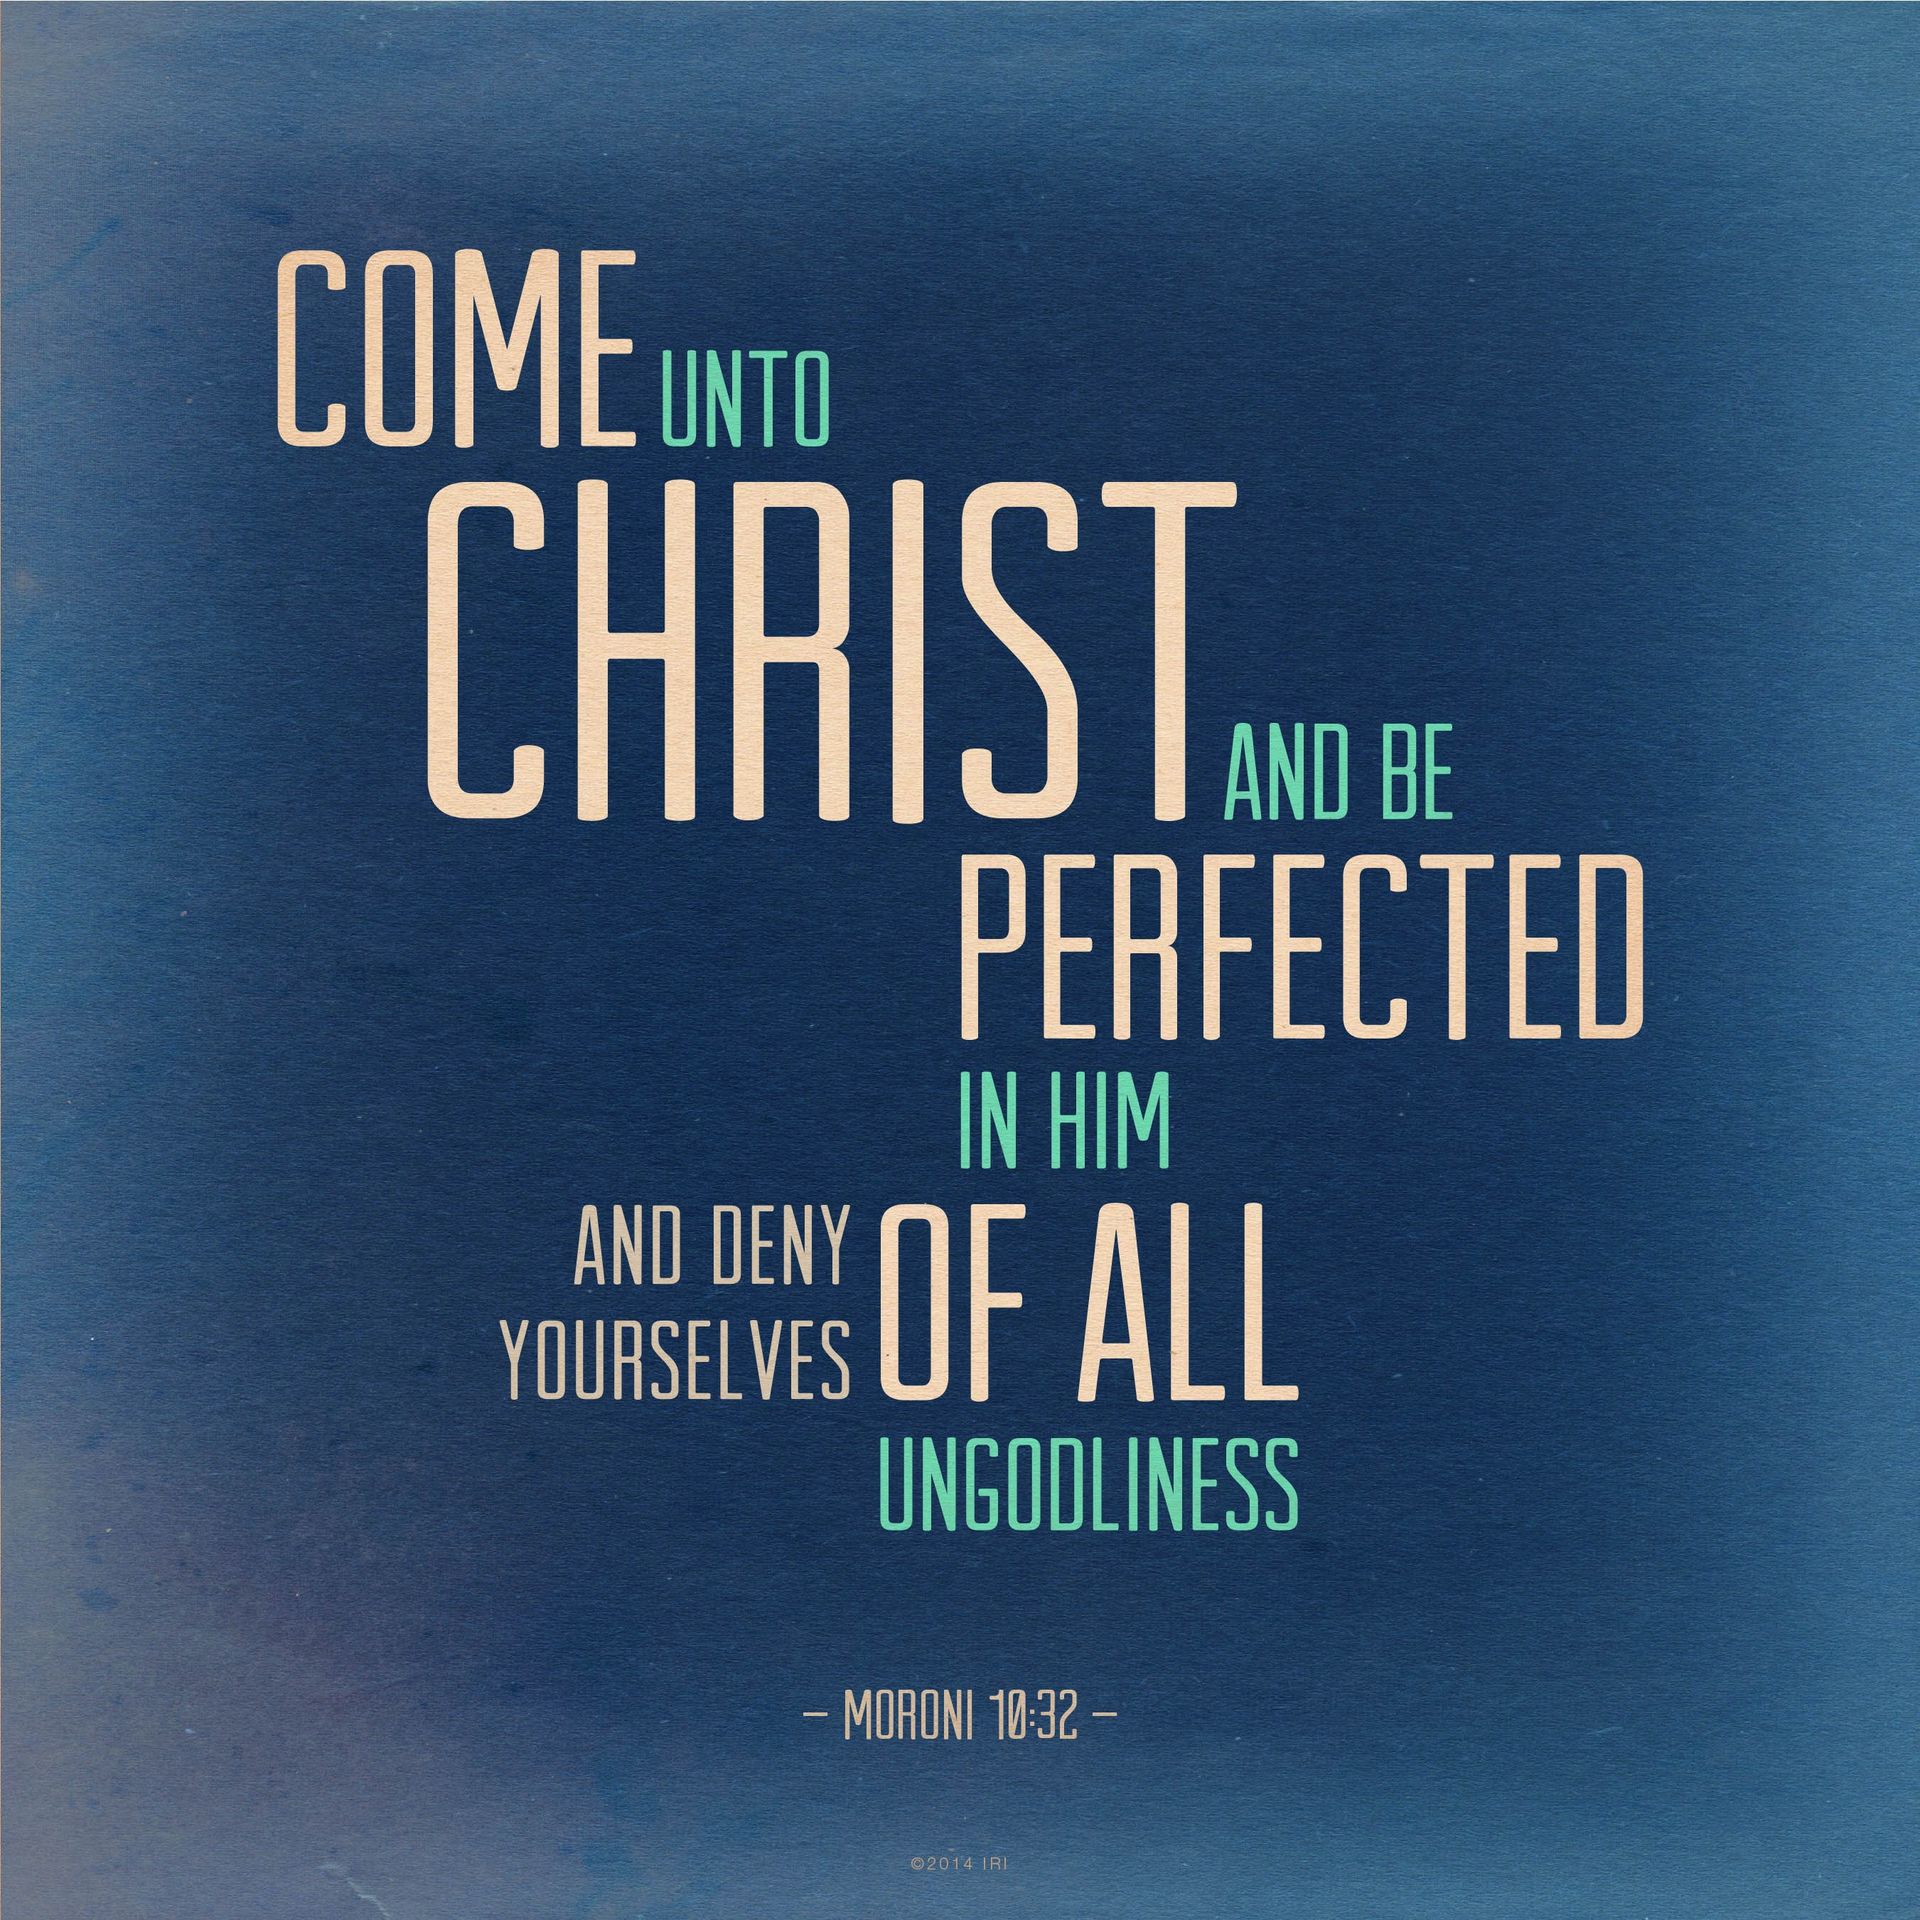 “Come unto Christ, and be perfected in him, and deny yourselves of all ungodliness.”—Moroni 10:32